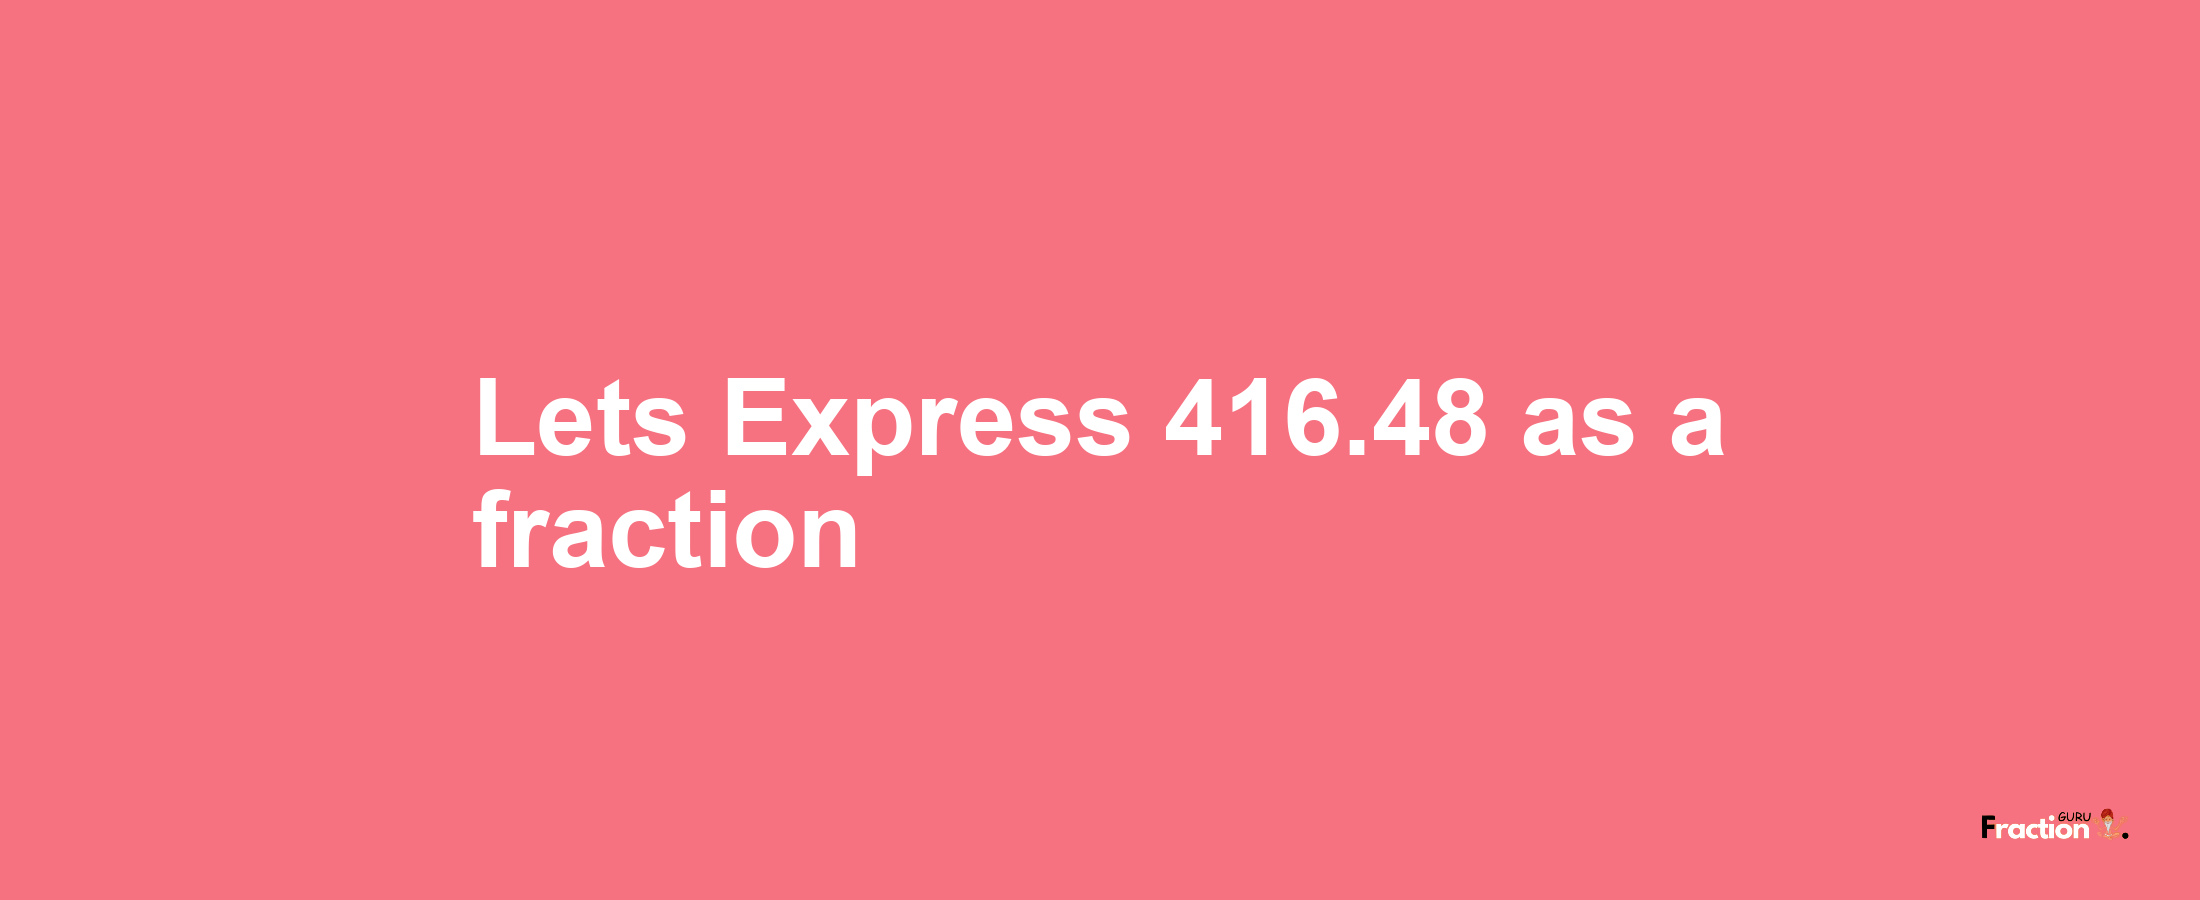 Lets Express 416.48 as afraction